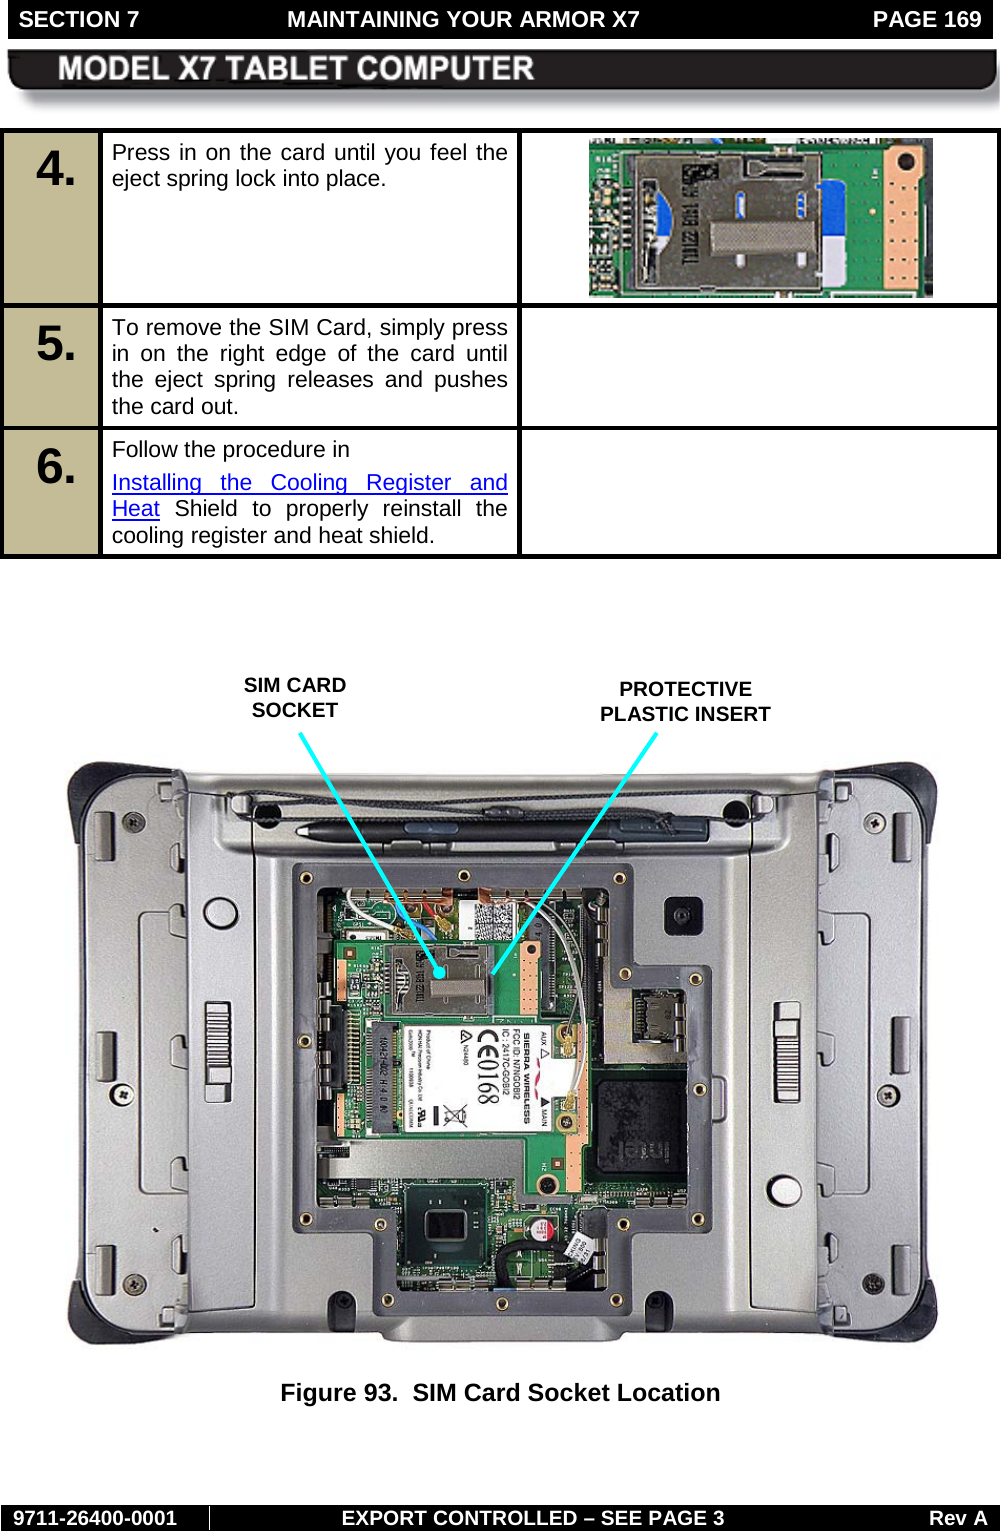 SECTION 7  MAINTAINING YOUR ARMOR X7  PAGE 169        9711-26400-0001 EXPORT CONTROLLED – SEE PAGE 3 Rev A 4.  Press in on the card until you feel the eject spring lock into place.  5.  To remove the SIM Card, simply press in on the right edge of the card until the eject spring releases and pushes the card out.  6.  Follow the procedure in  Installing the Cooling Register and Heat Shield to properly reinstall the cooling register and heat shield.         Figure 93.  SIM Card Socket Location    SIM CARD  SOCKET PROTECTIVE PLASTIC INSERT 